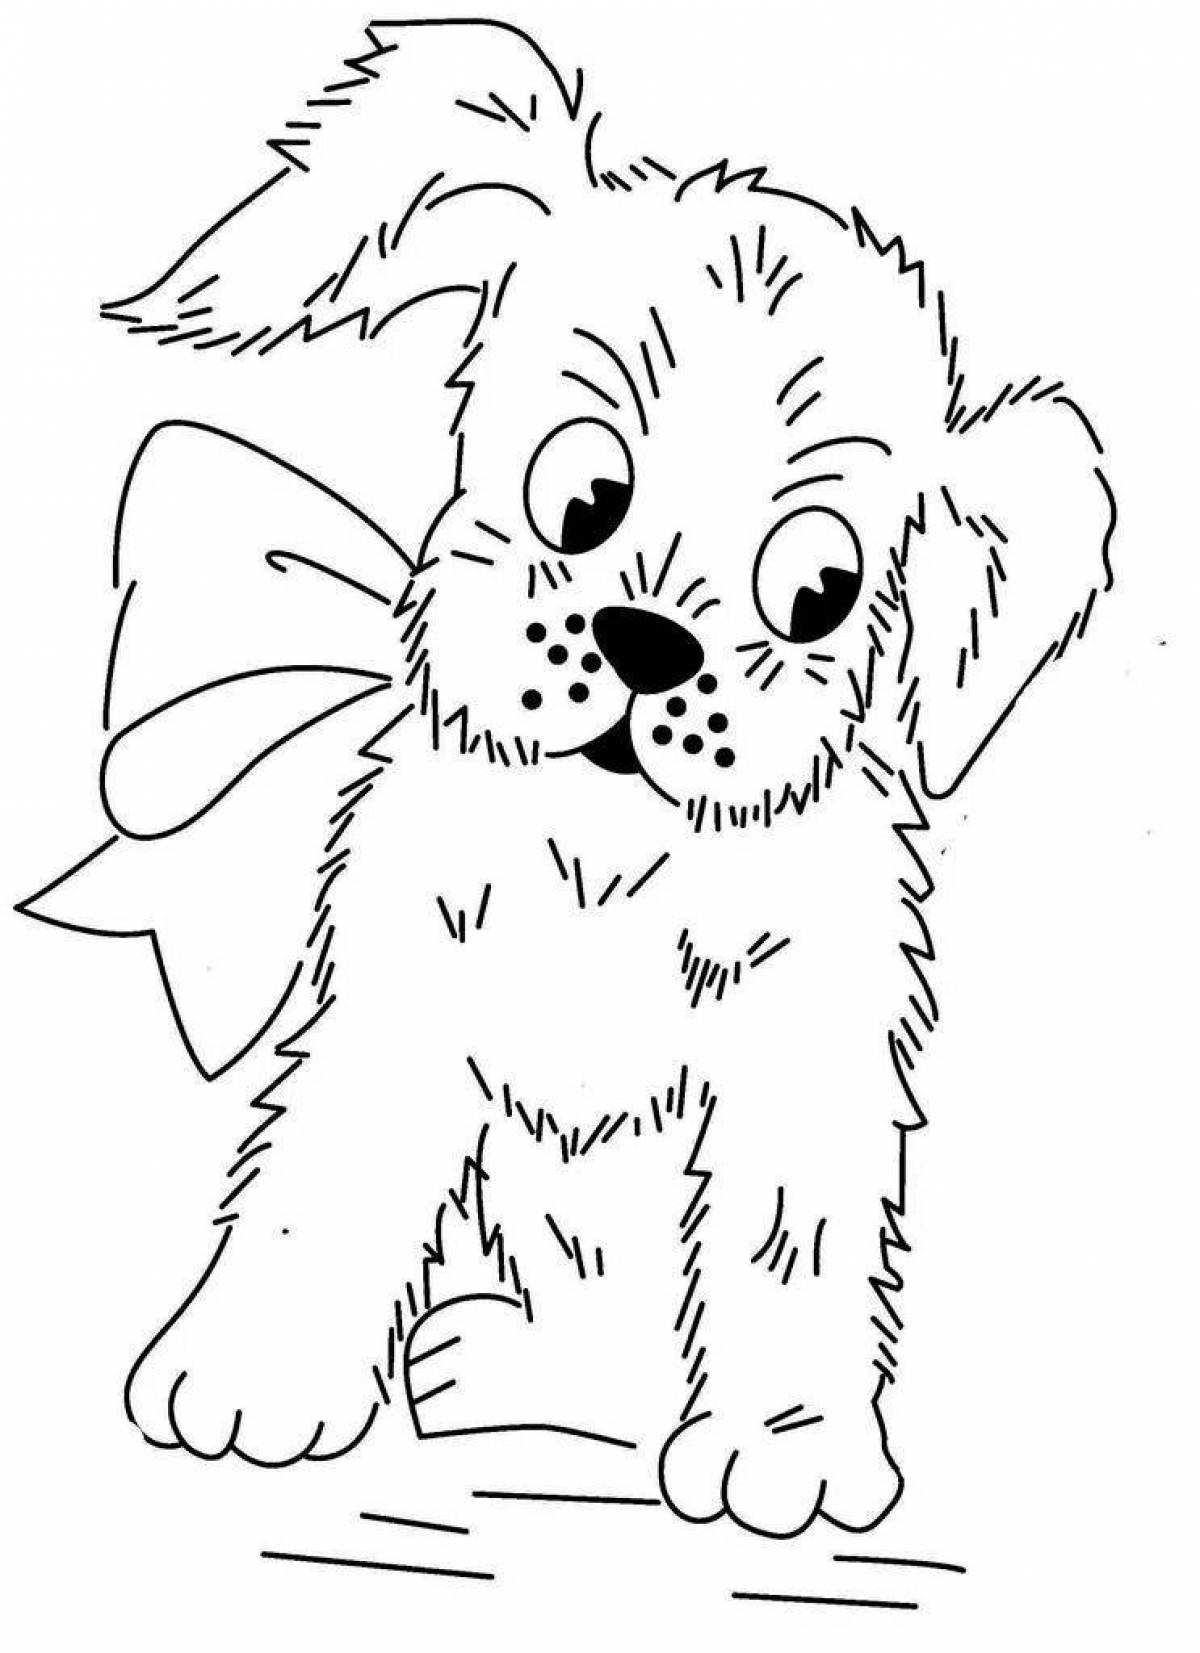 Snuggable dog and cat coloring pages for kids